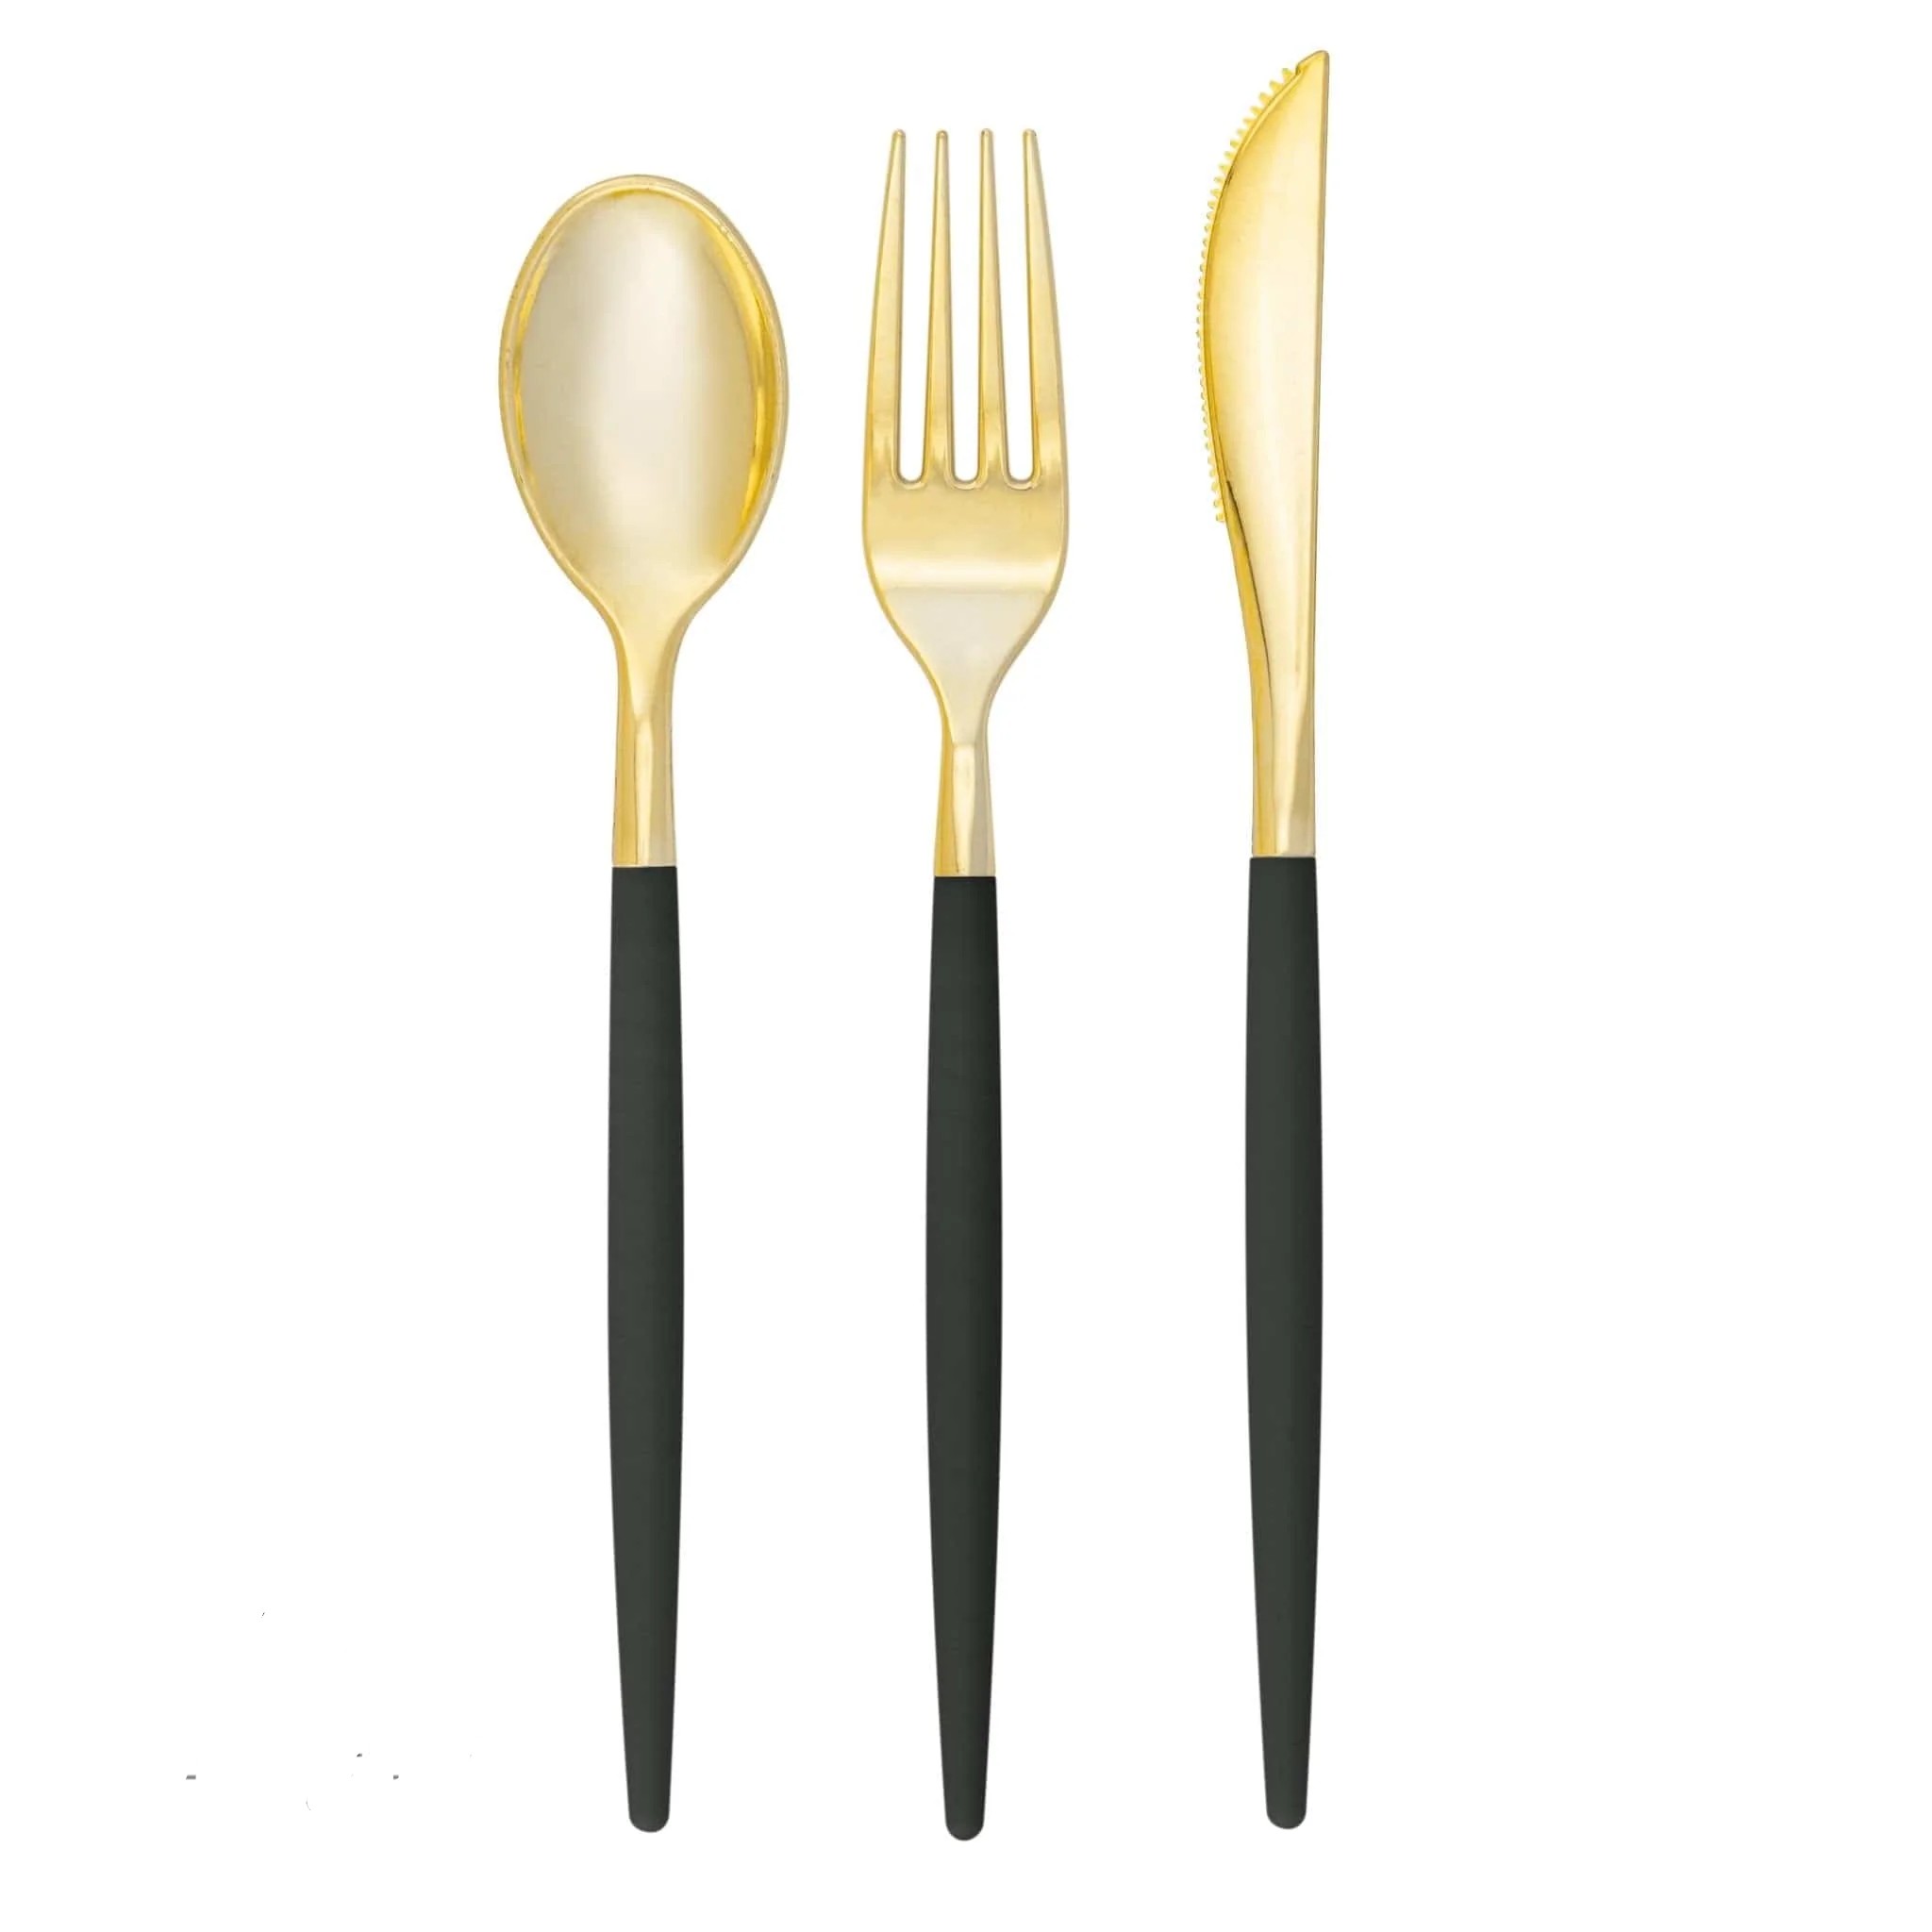 Luxe Party Emerald and Gold Two Tone Plastic Cutlery Set - 32 pcs